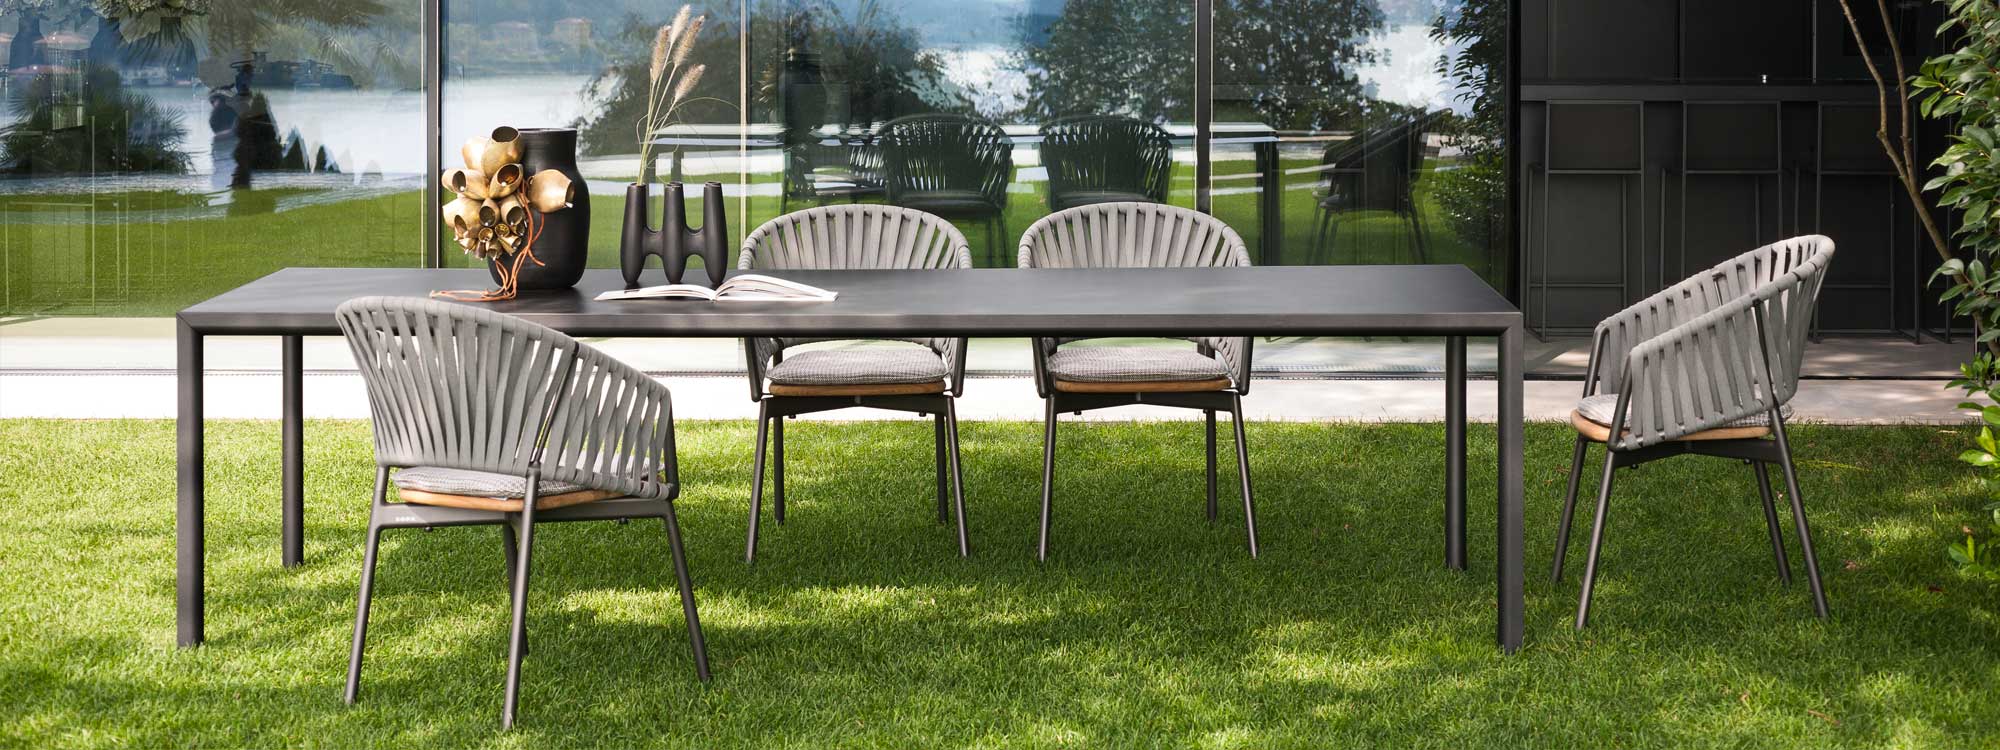 Plein Air minimalist table with Piper garden chairs on grassy lawn